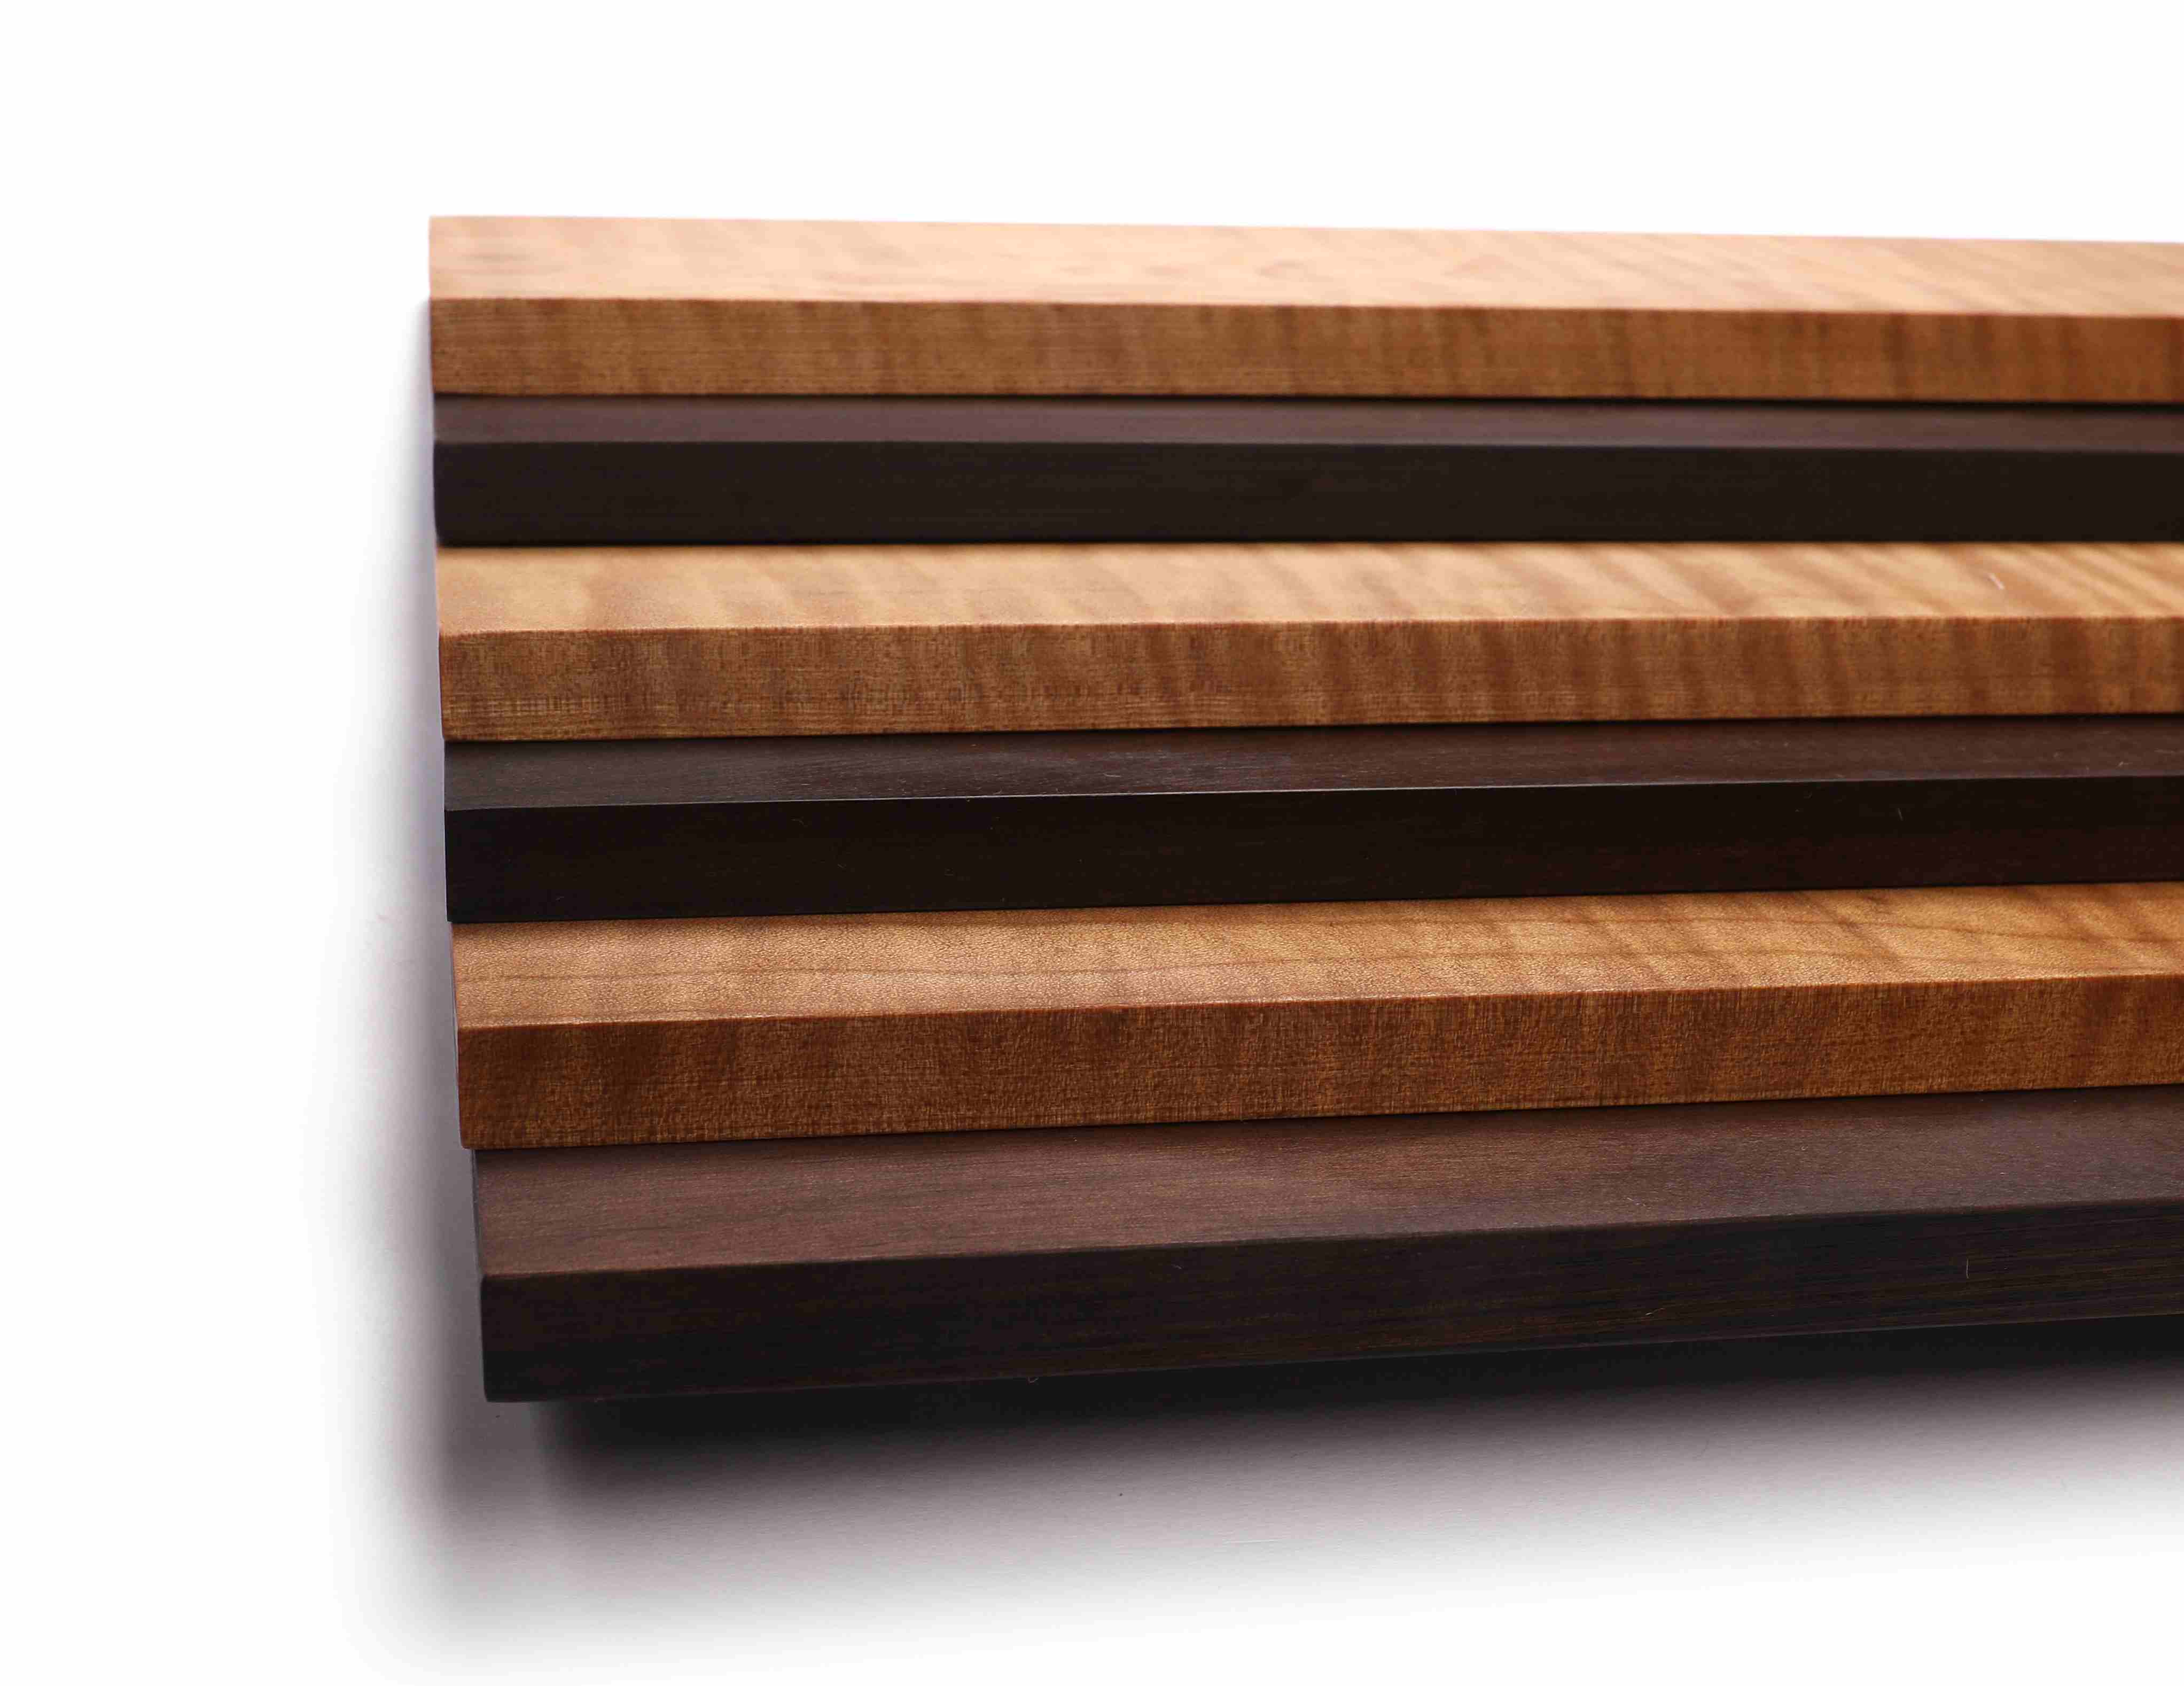 Fretboards from Sonowood flamed maple, maple and walnut